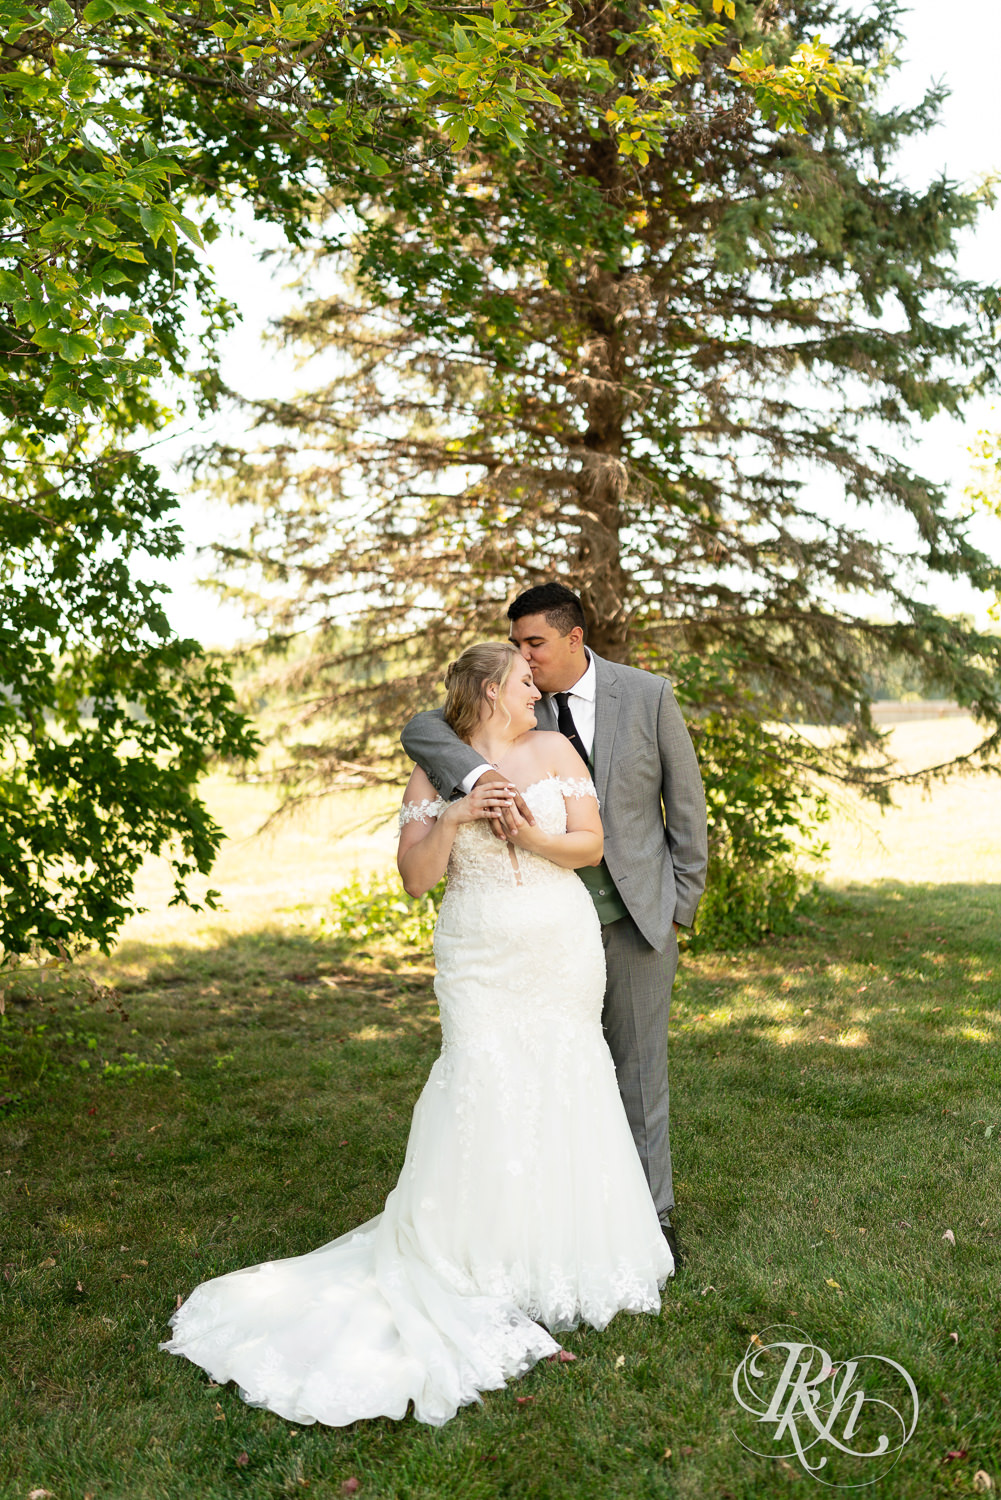 Bride and groom kiss on wedding day at Cottage Farmhouse in Glencoe, Minnesota.